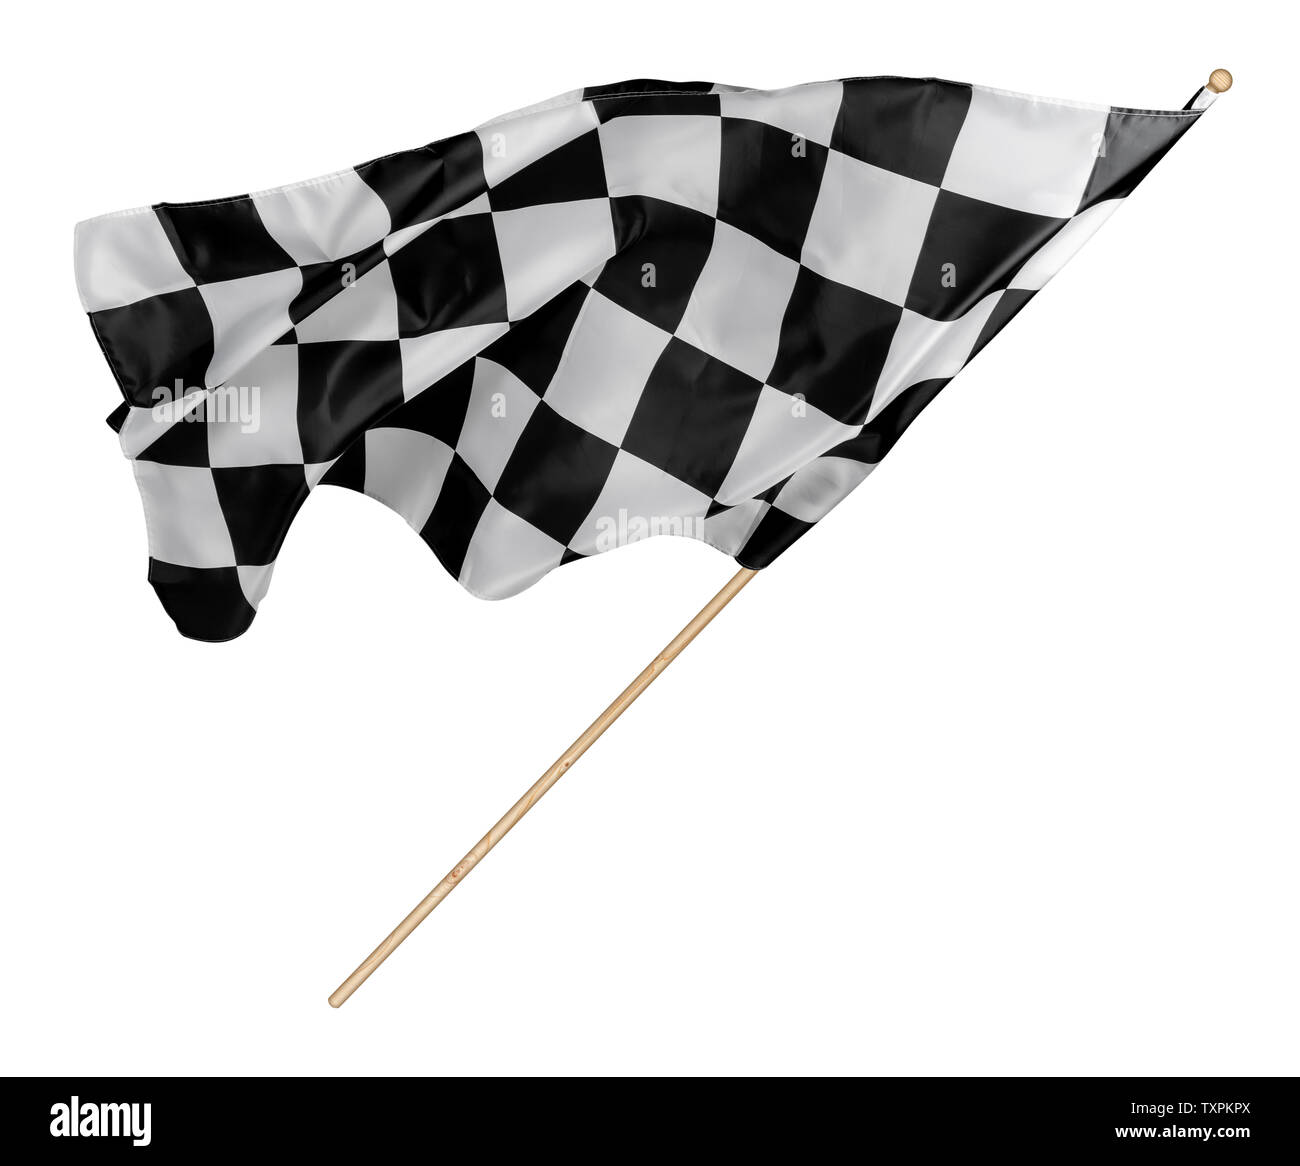 Black white race chequered or checkered flag with wooden stick isolated background. motorsport car racing symbol concept Stock Photo